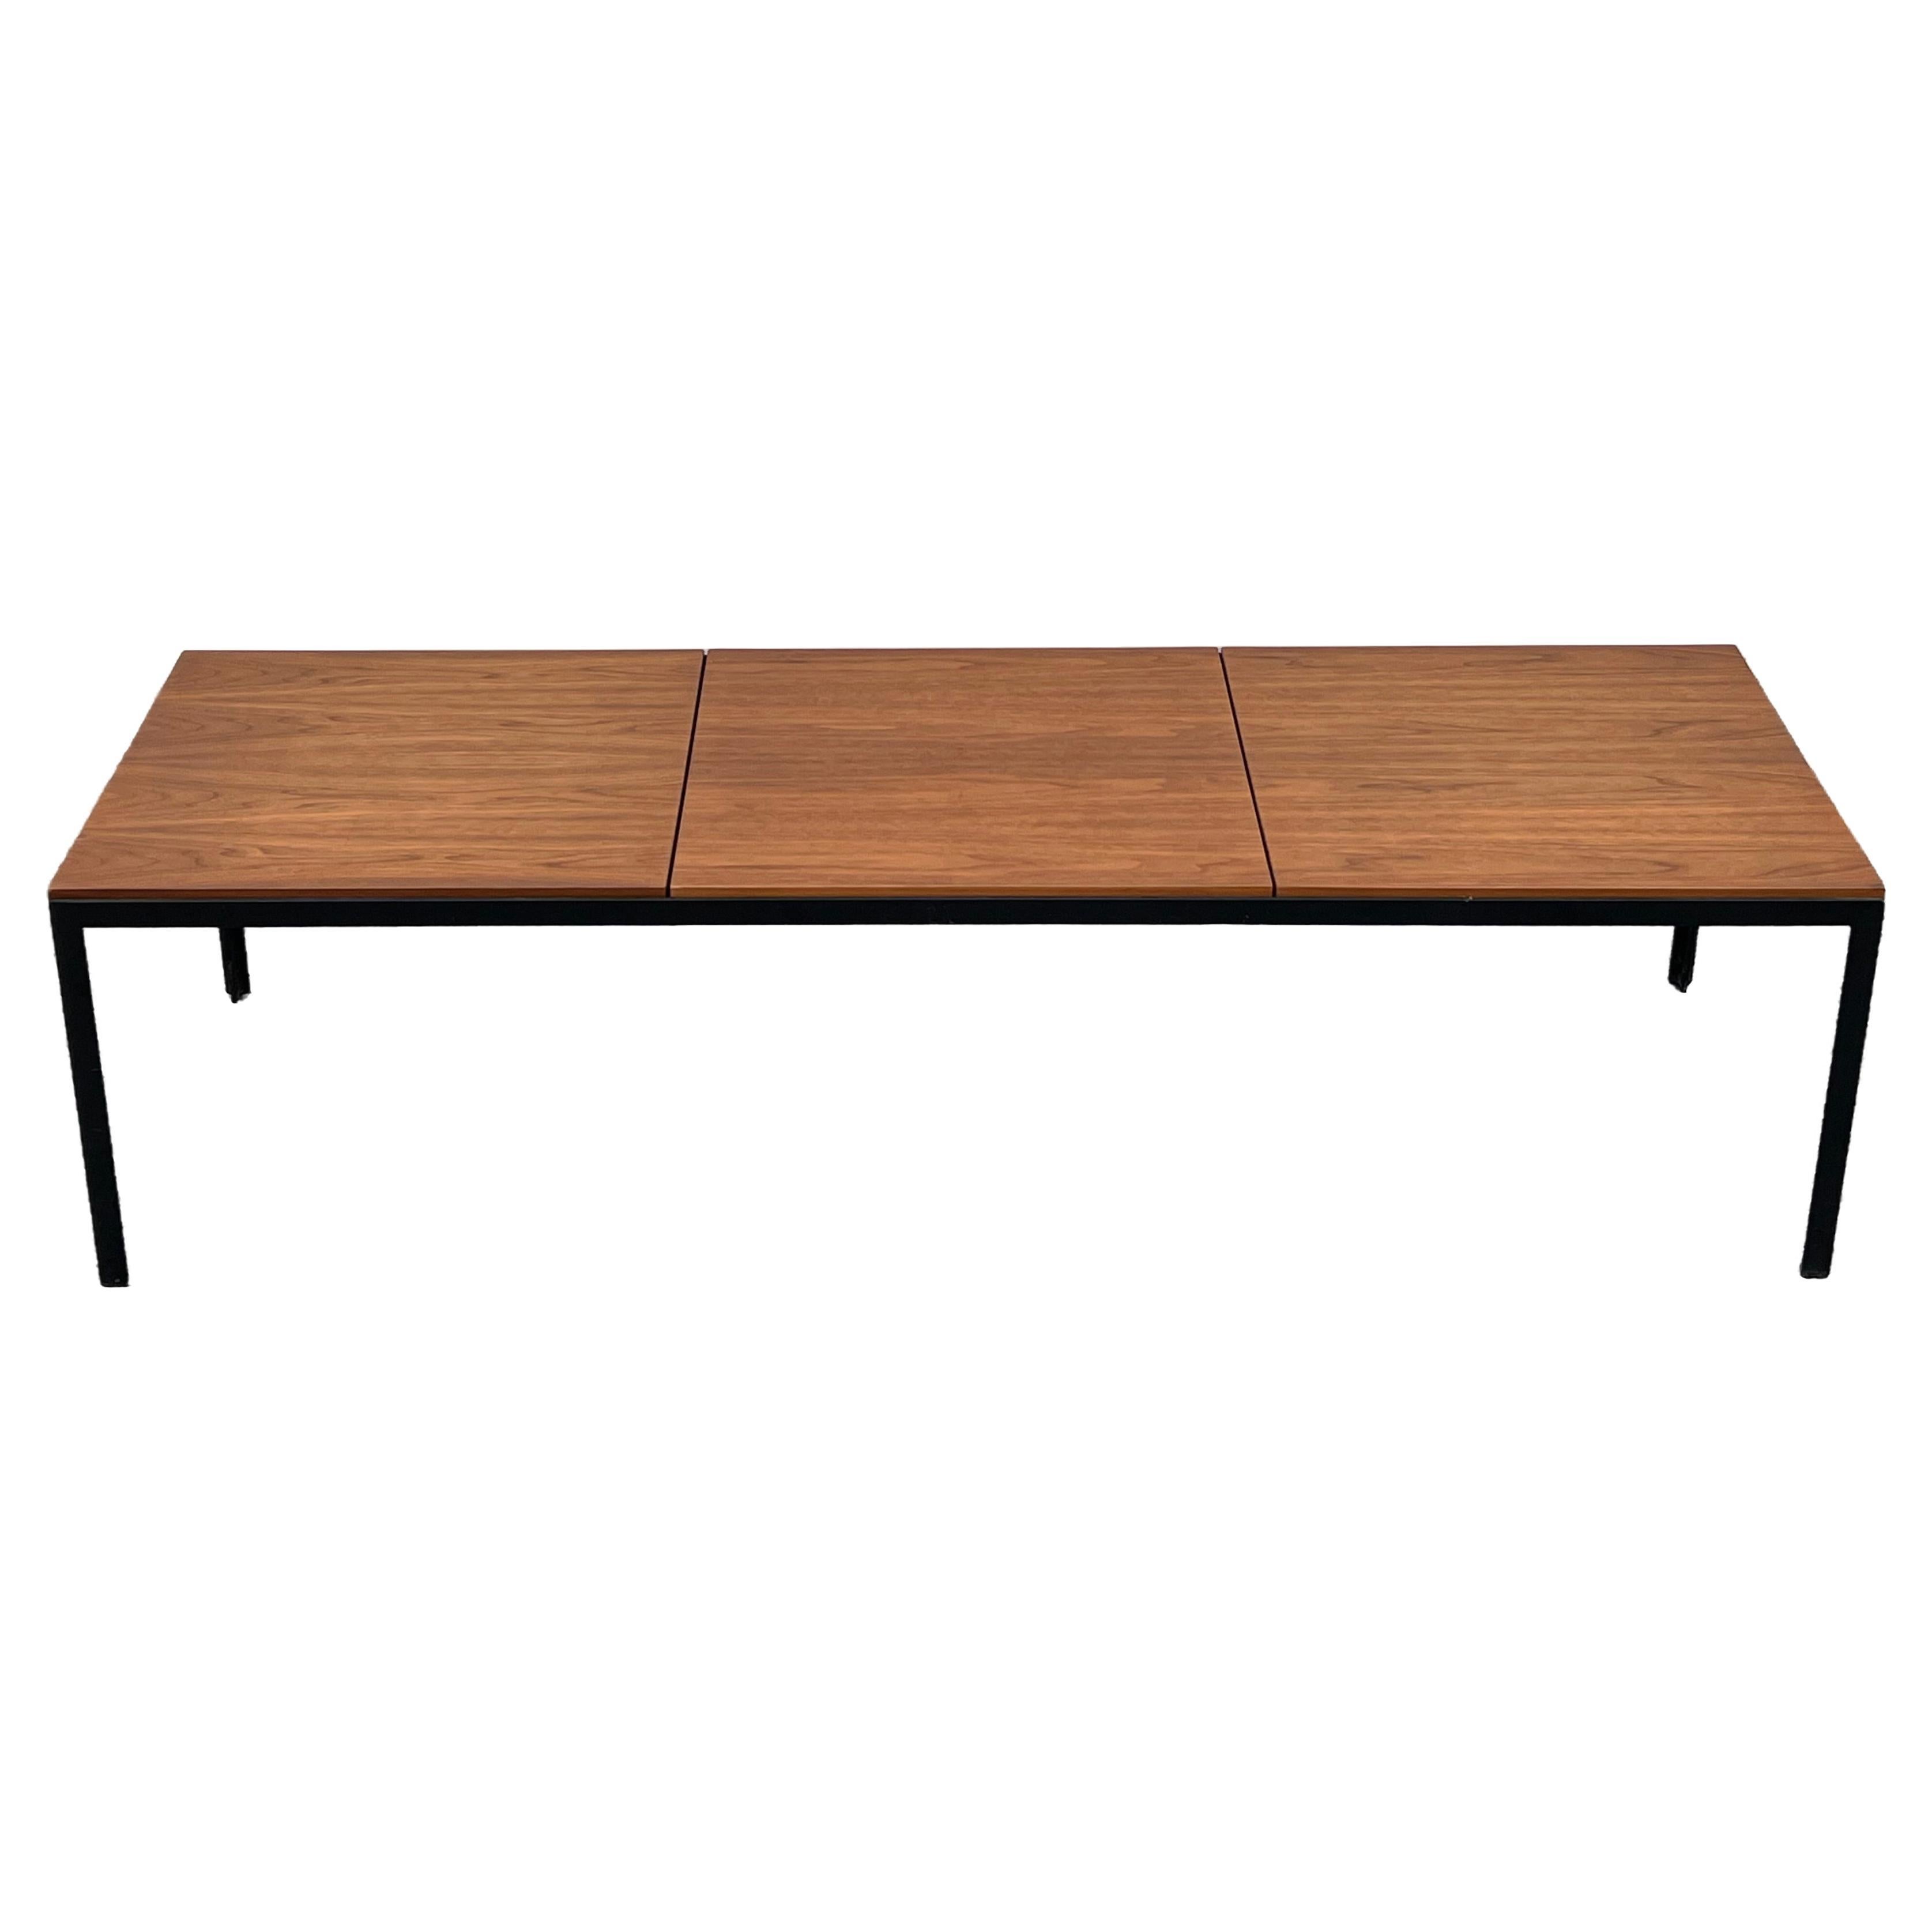 A Classic Knoll Coffee Table Or Bench With Angle Iron Frame Ca' 1960's